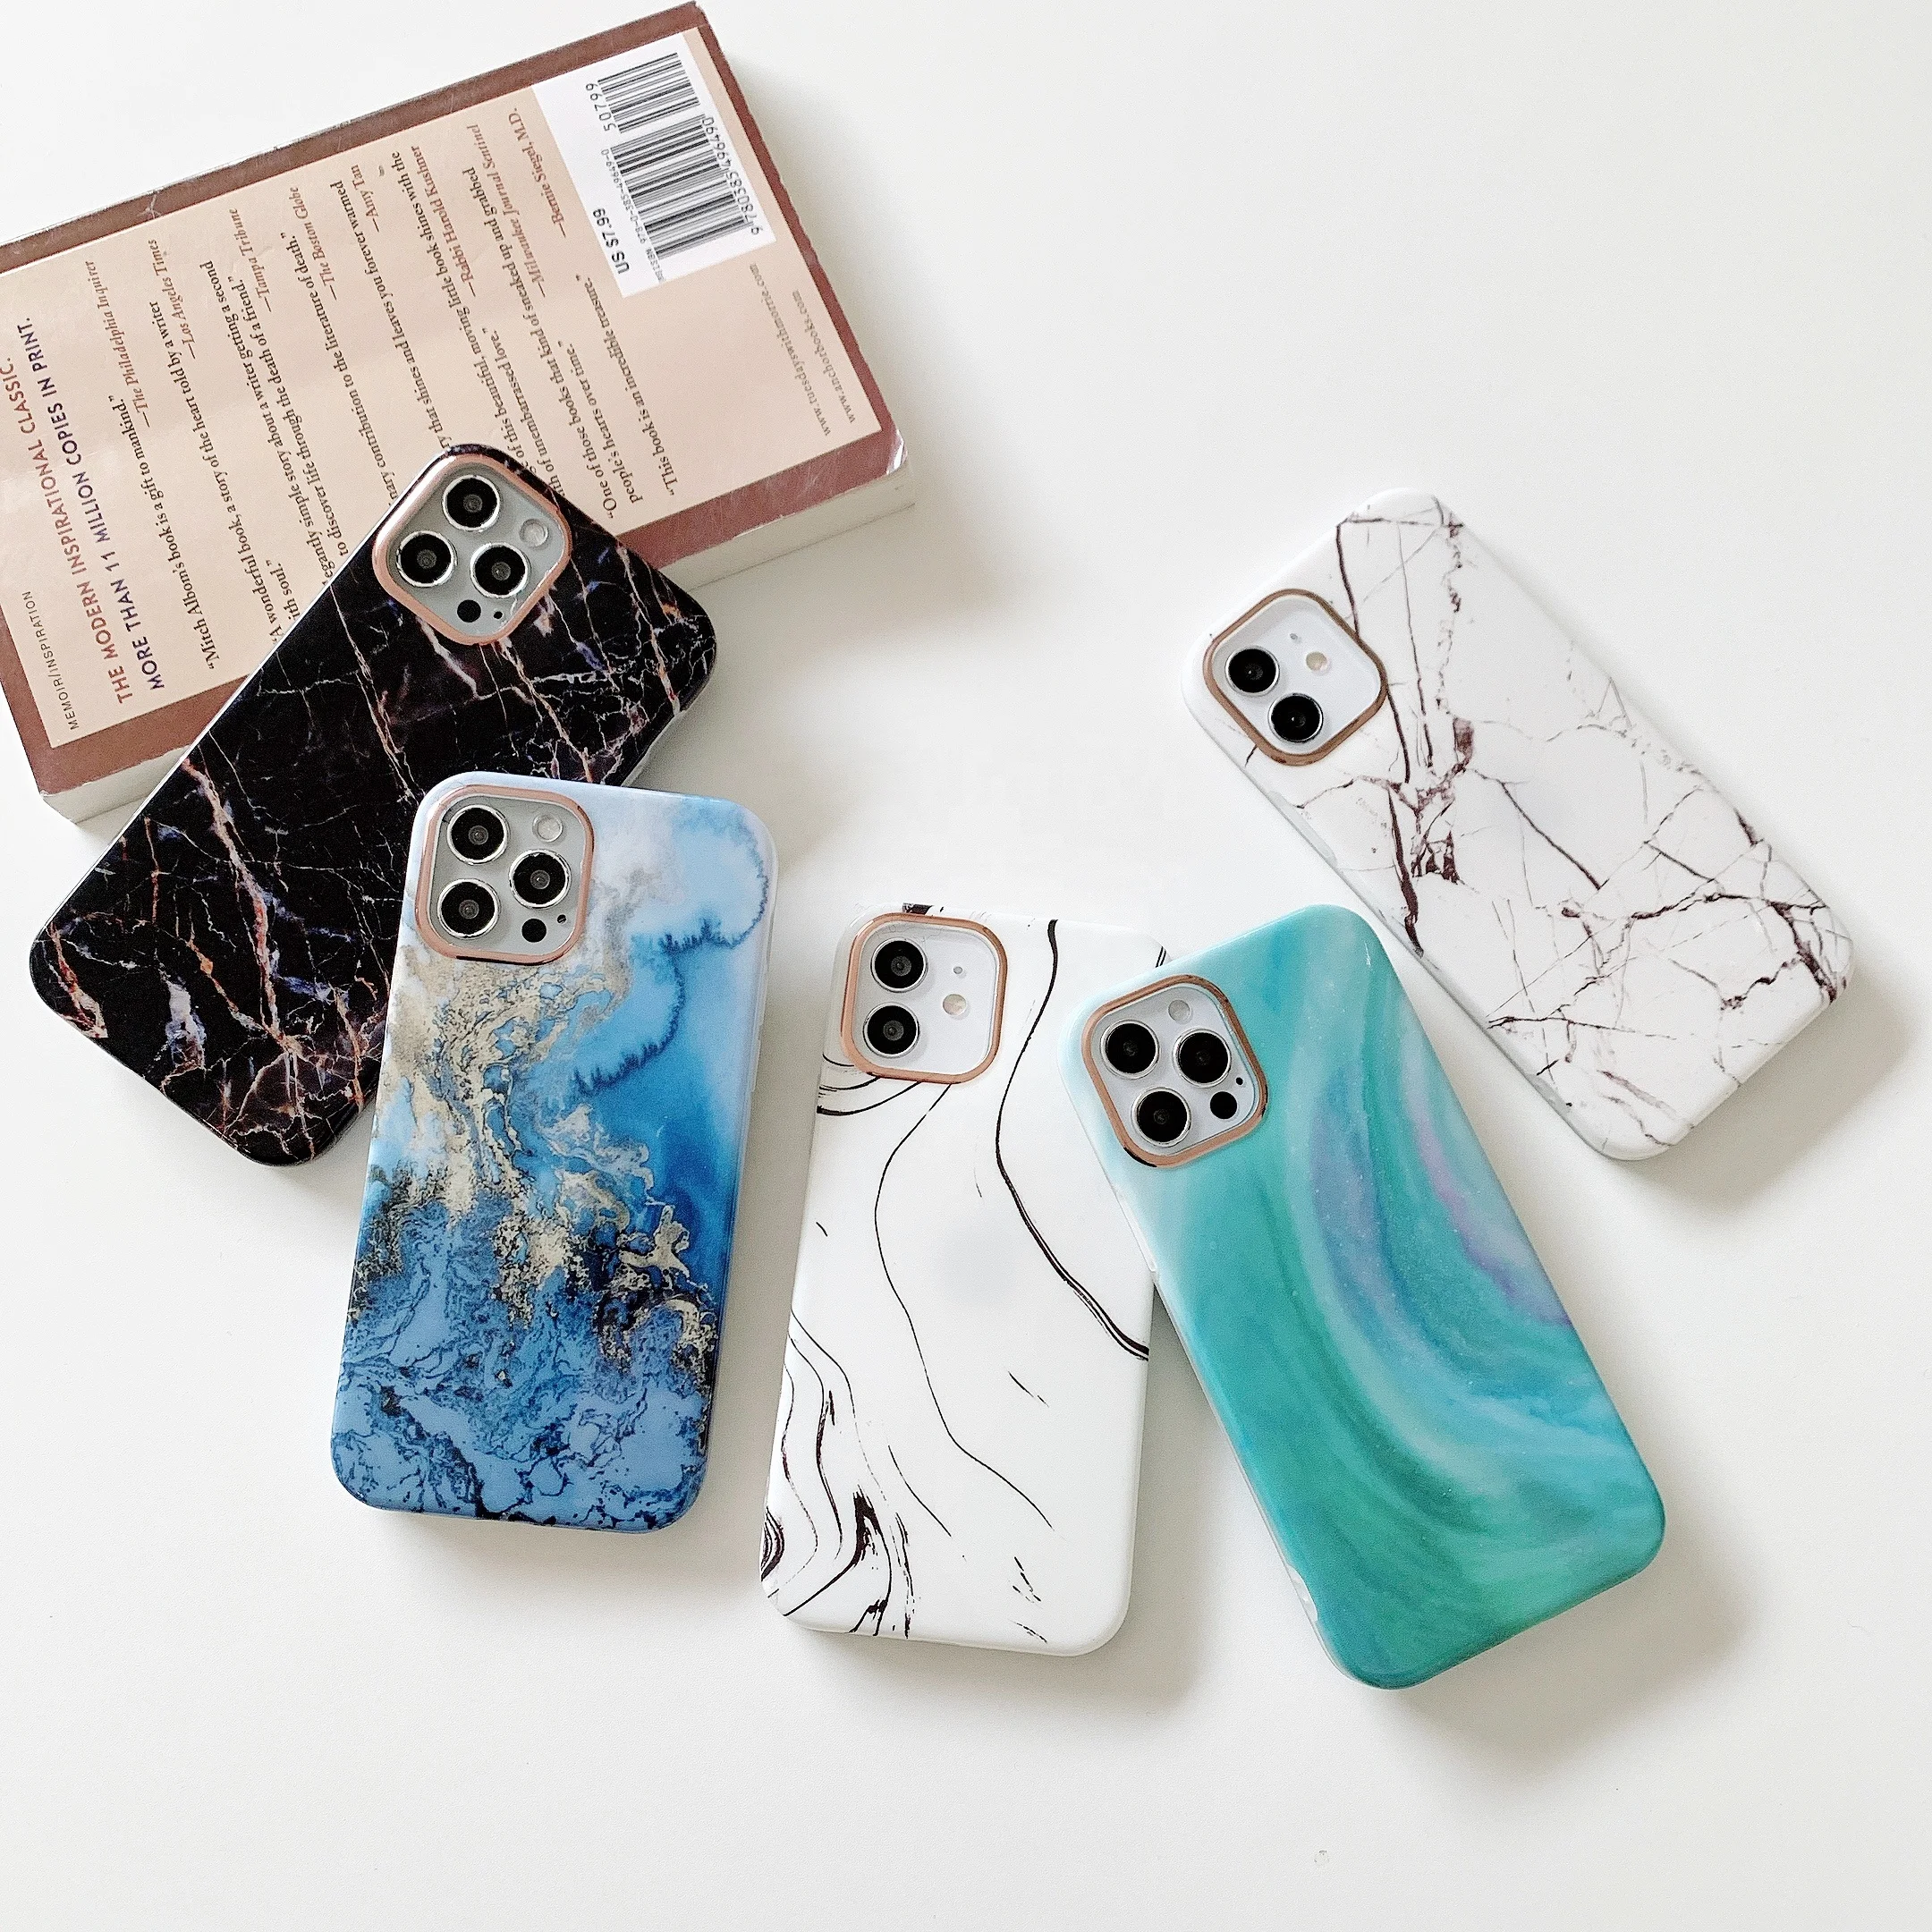 

Factory Wholesale IMD TPU Mobile Phone Marble Case For iPhone 12 Pro Max 12Pro 12 Mini 11 Pro X XR XS Max, Multi-color, can be customized